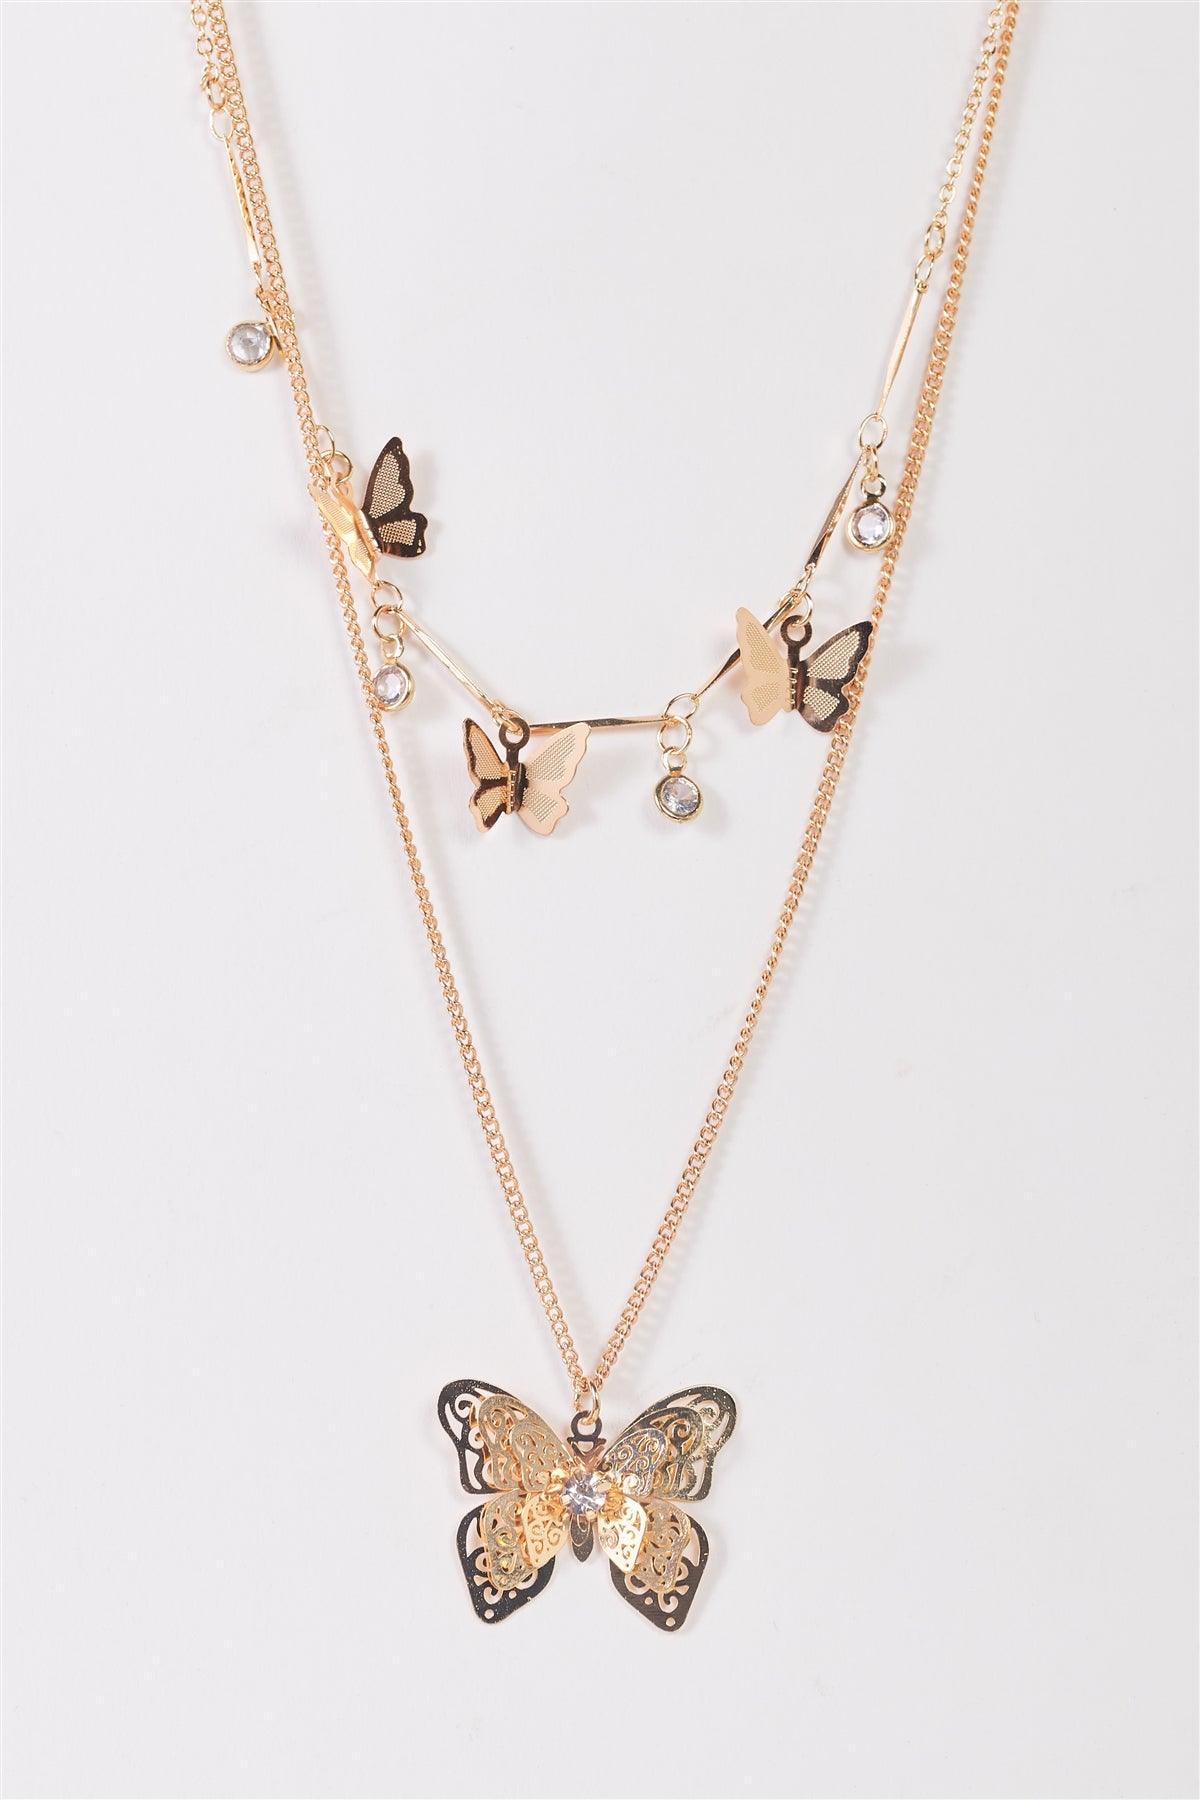 Gold Double Chain With 3D Butterflies Pendants & Faux Crystals Necklace /3 Pieces